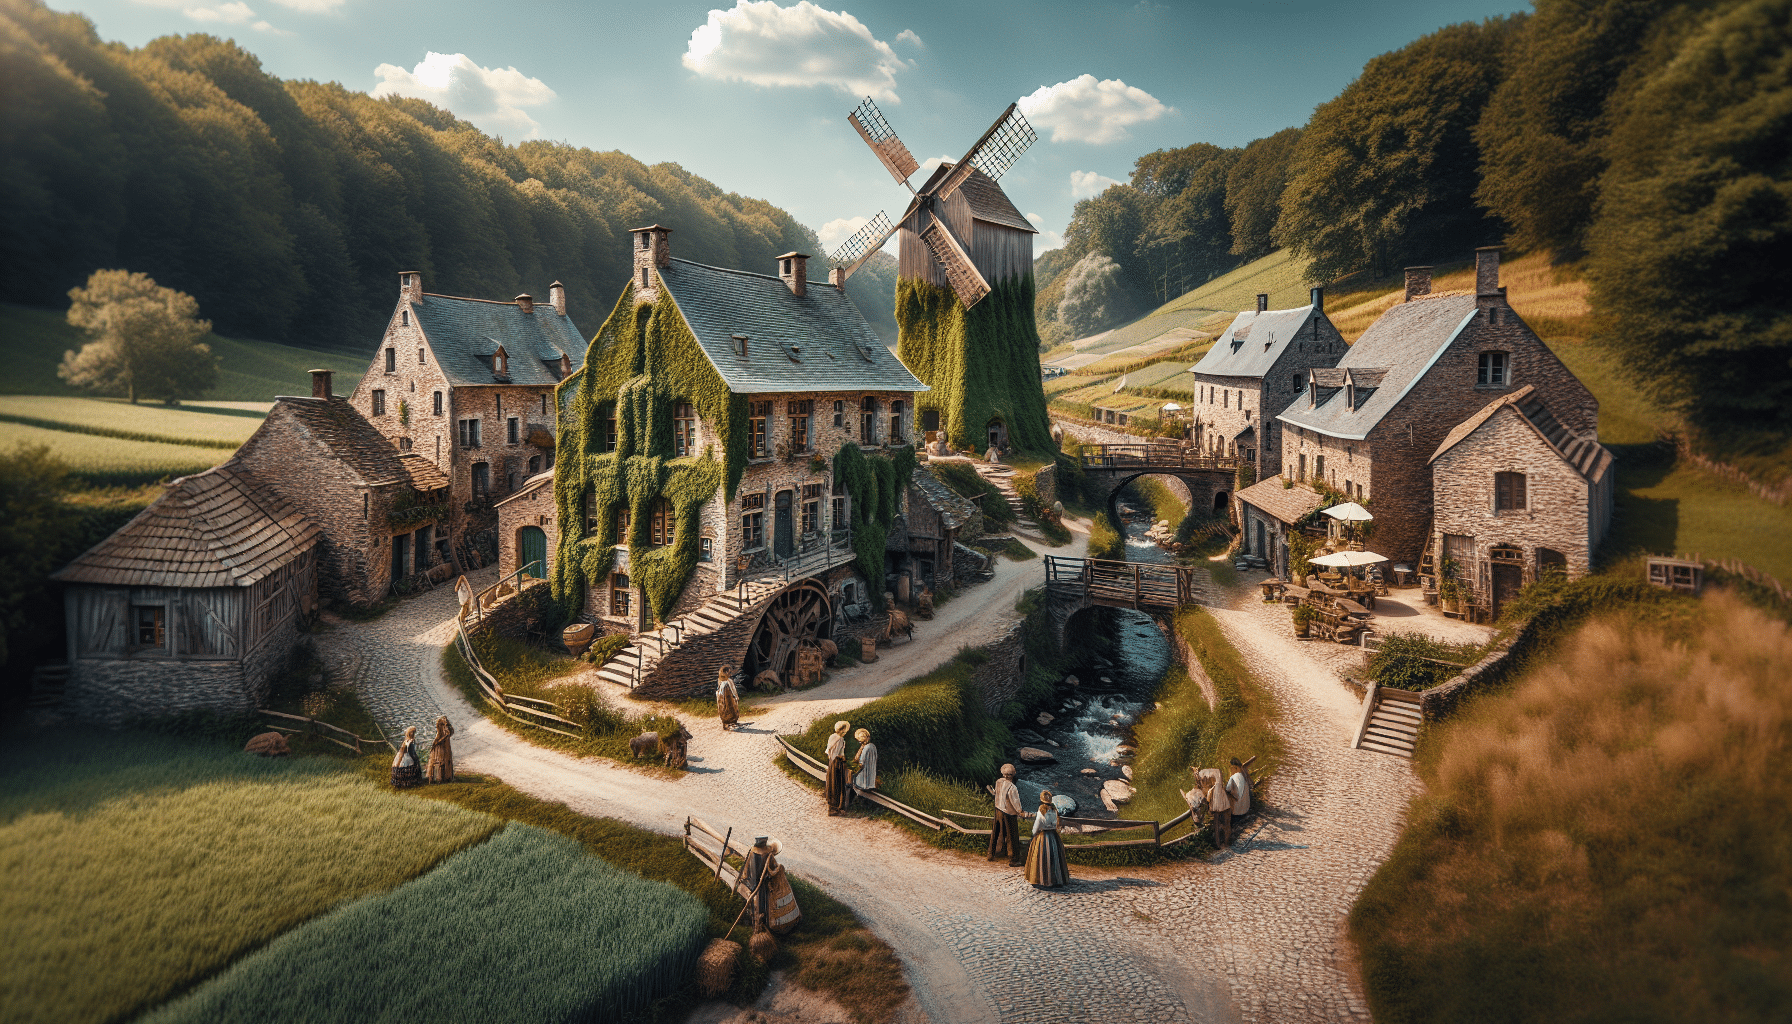 explore the timeless beauty of wallonia's most enchanting villages and experience their authentic charm.